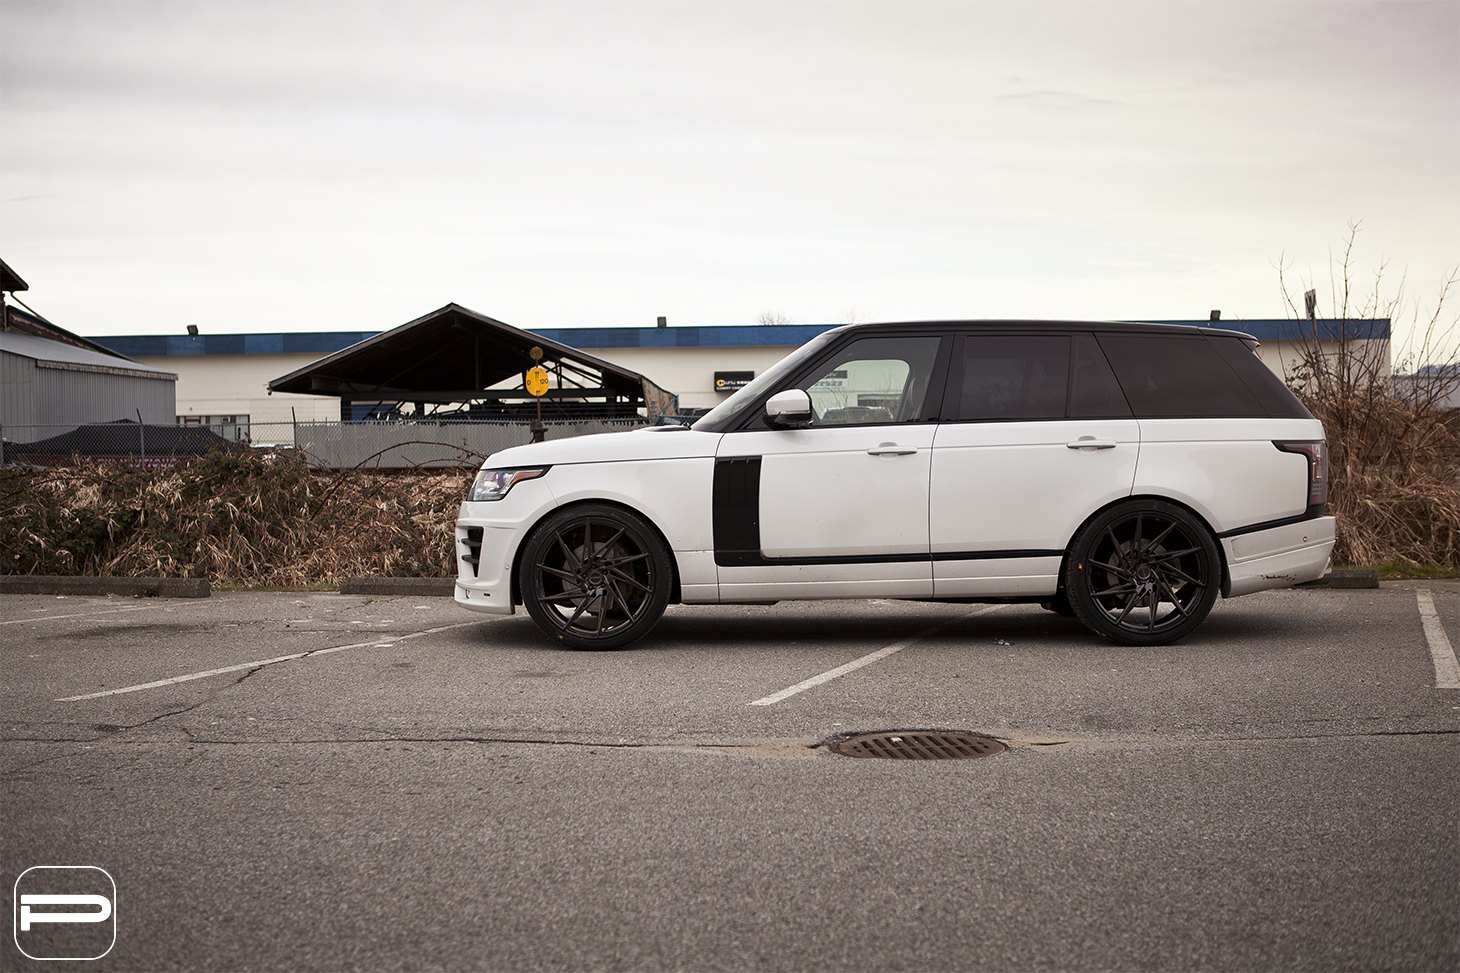 Aftermarket Side Skirts on White Range Rover - Photo by PUR Wheels